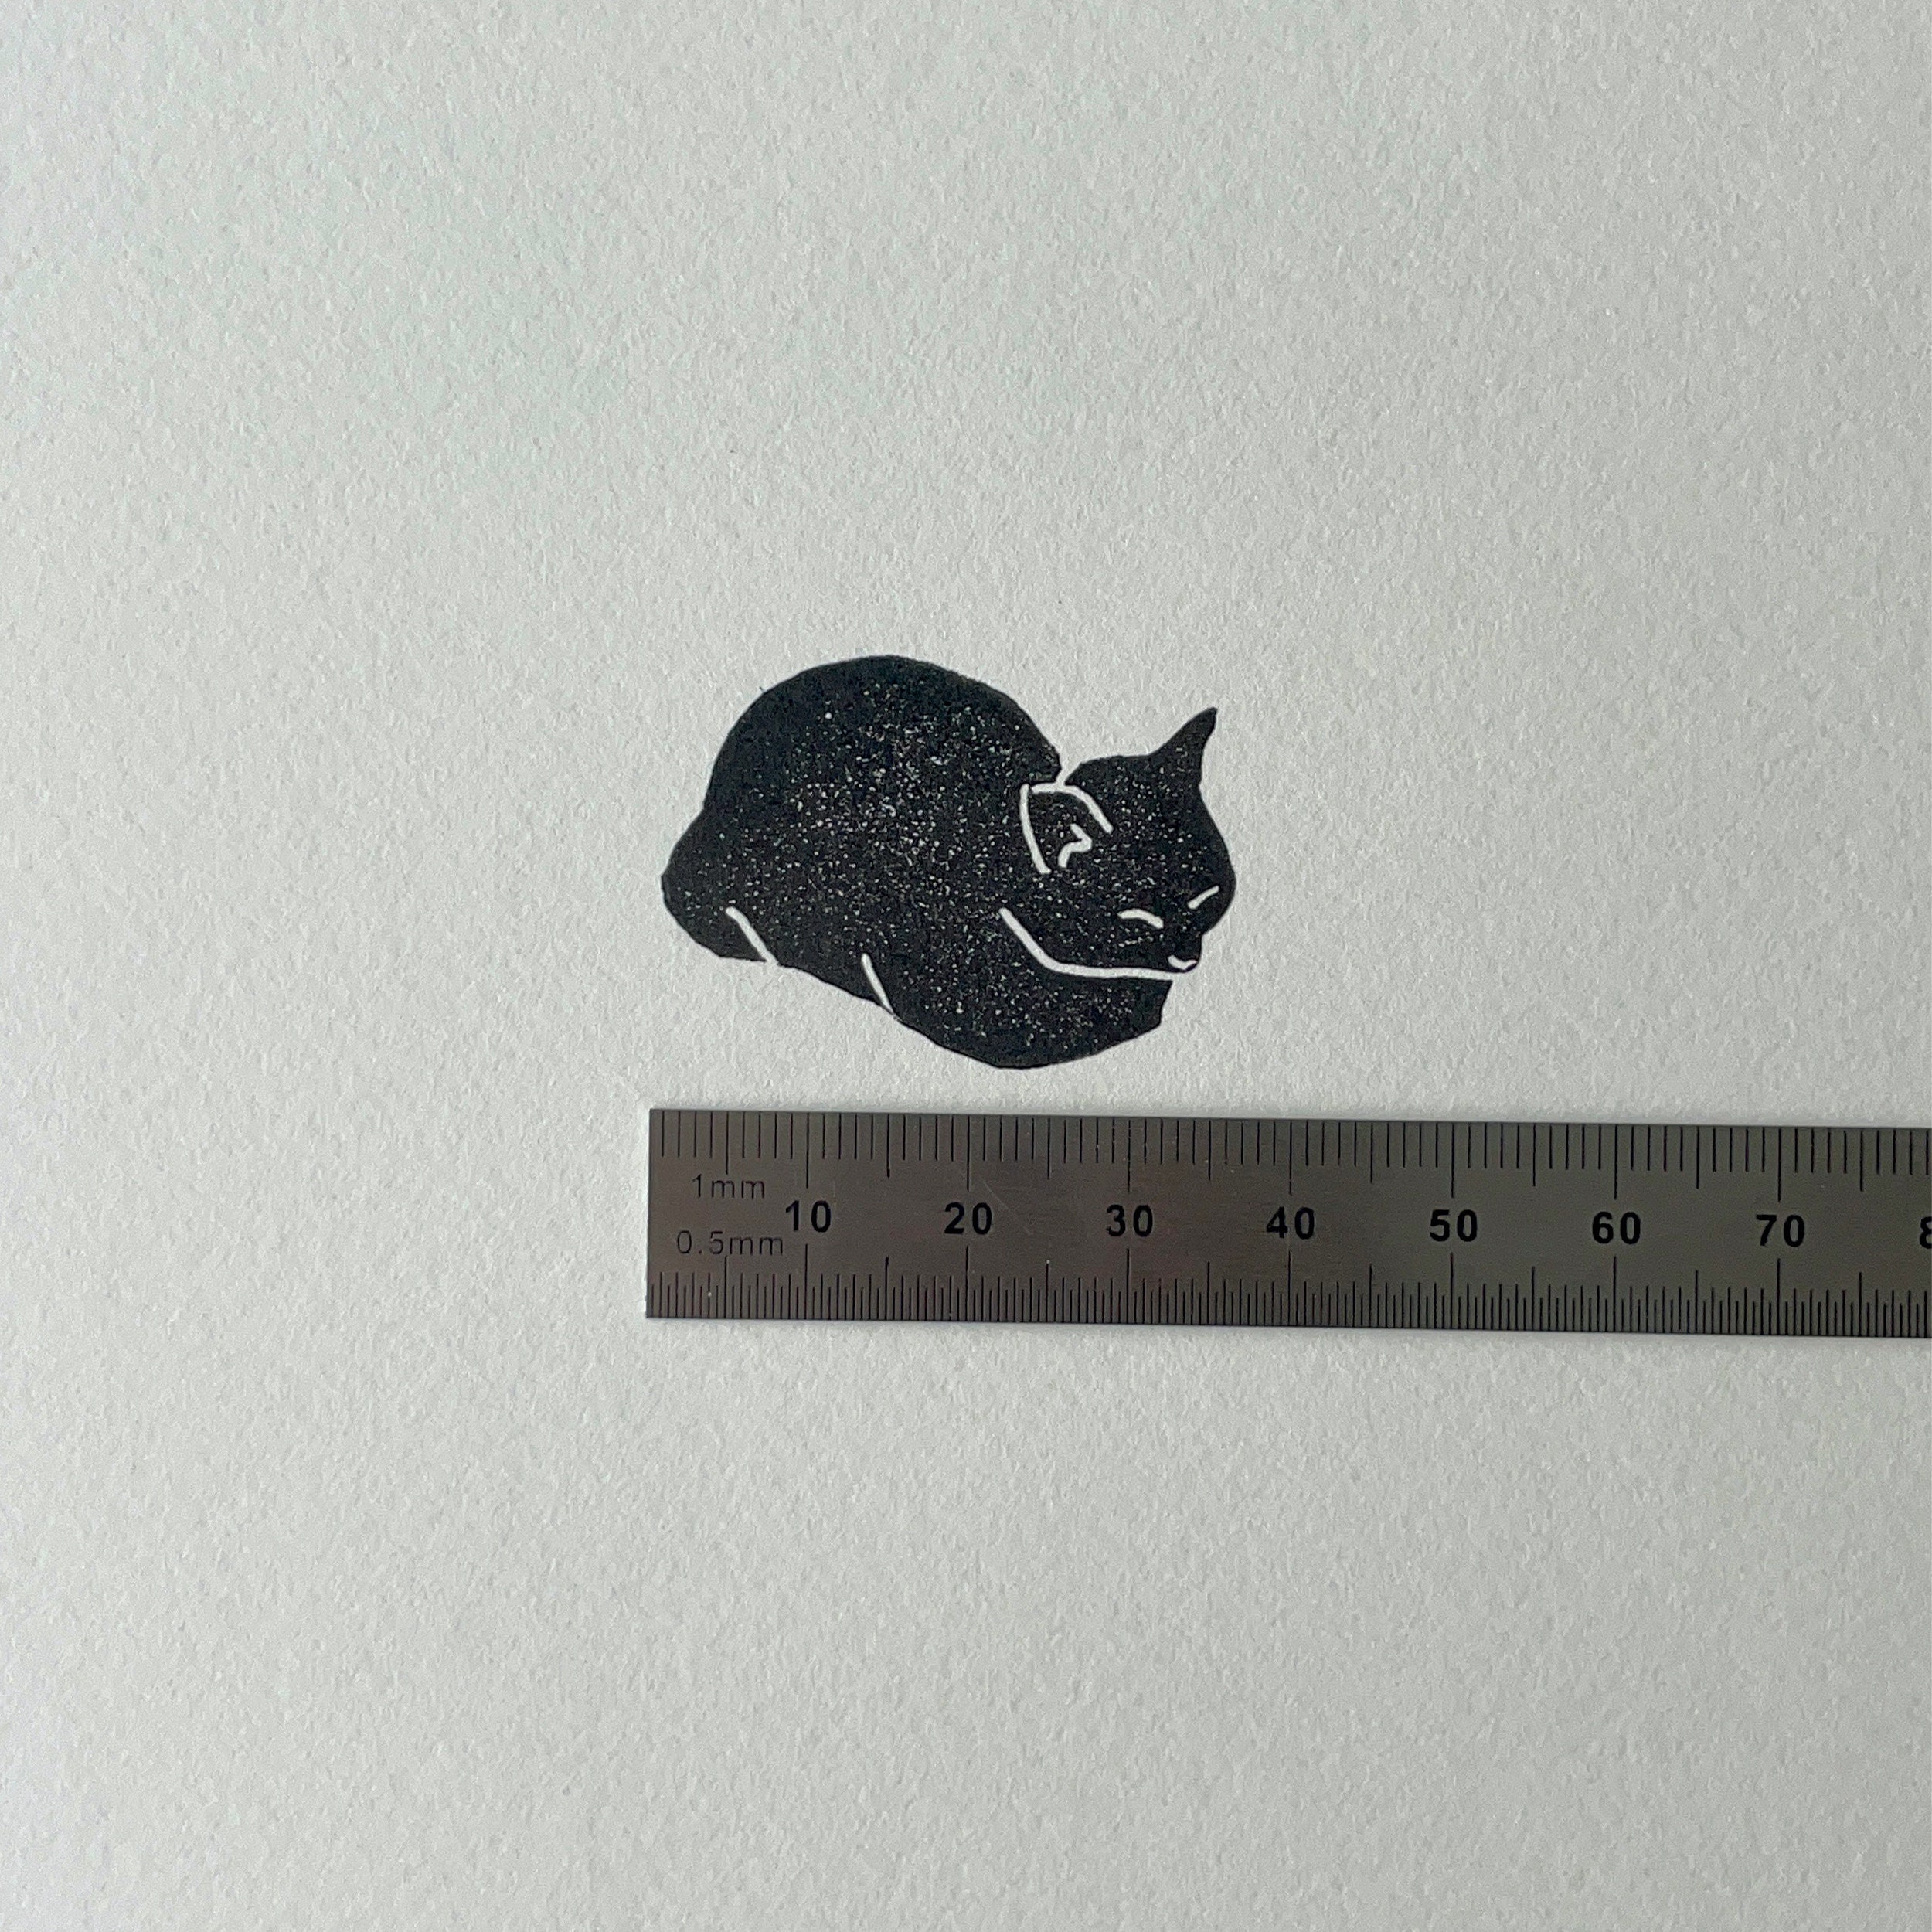 Sleeping Cat Rubber Stamp Hand Carved Rubber Stamp Stamping Linocut Stamp  Cute Cat Cat Print Handmade 